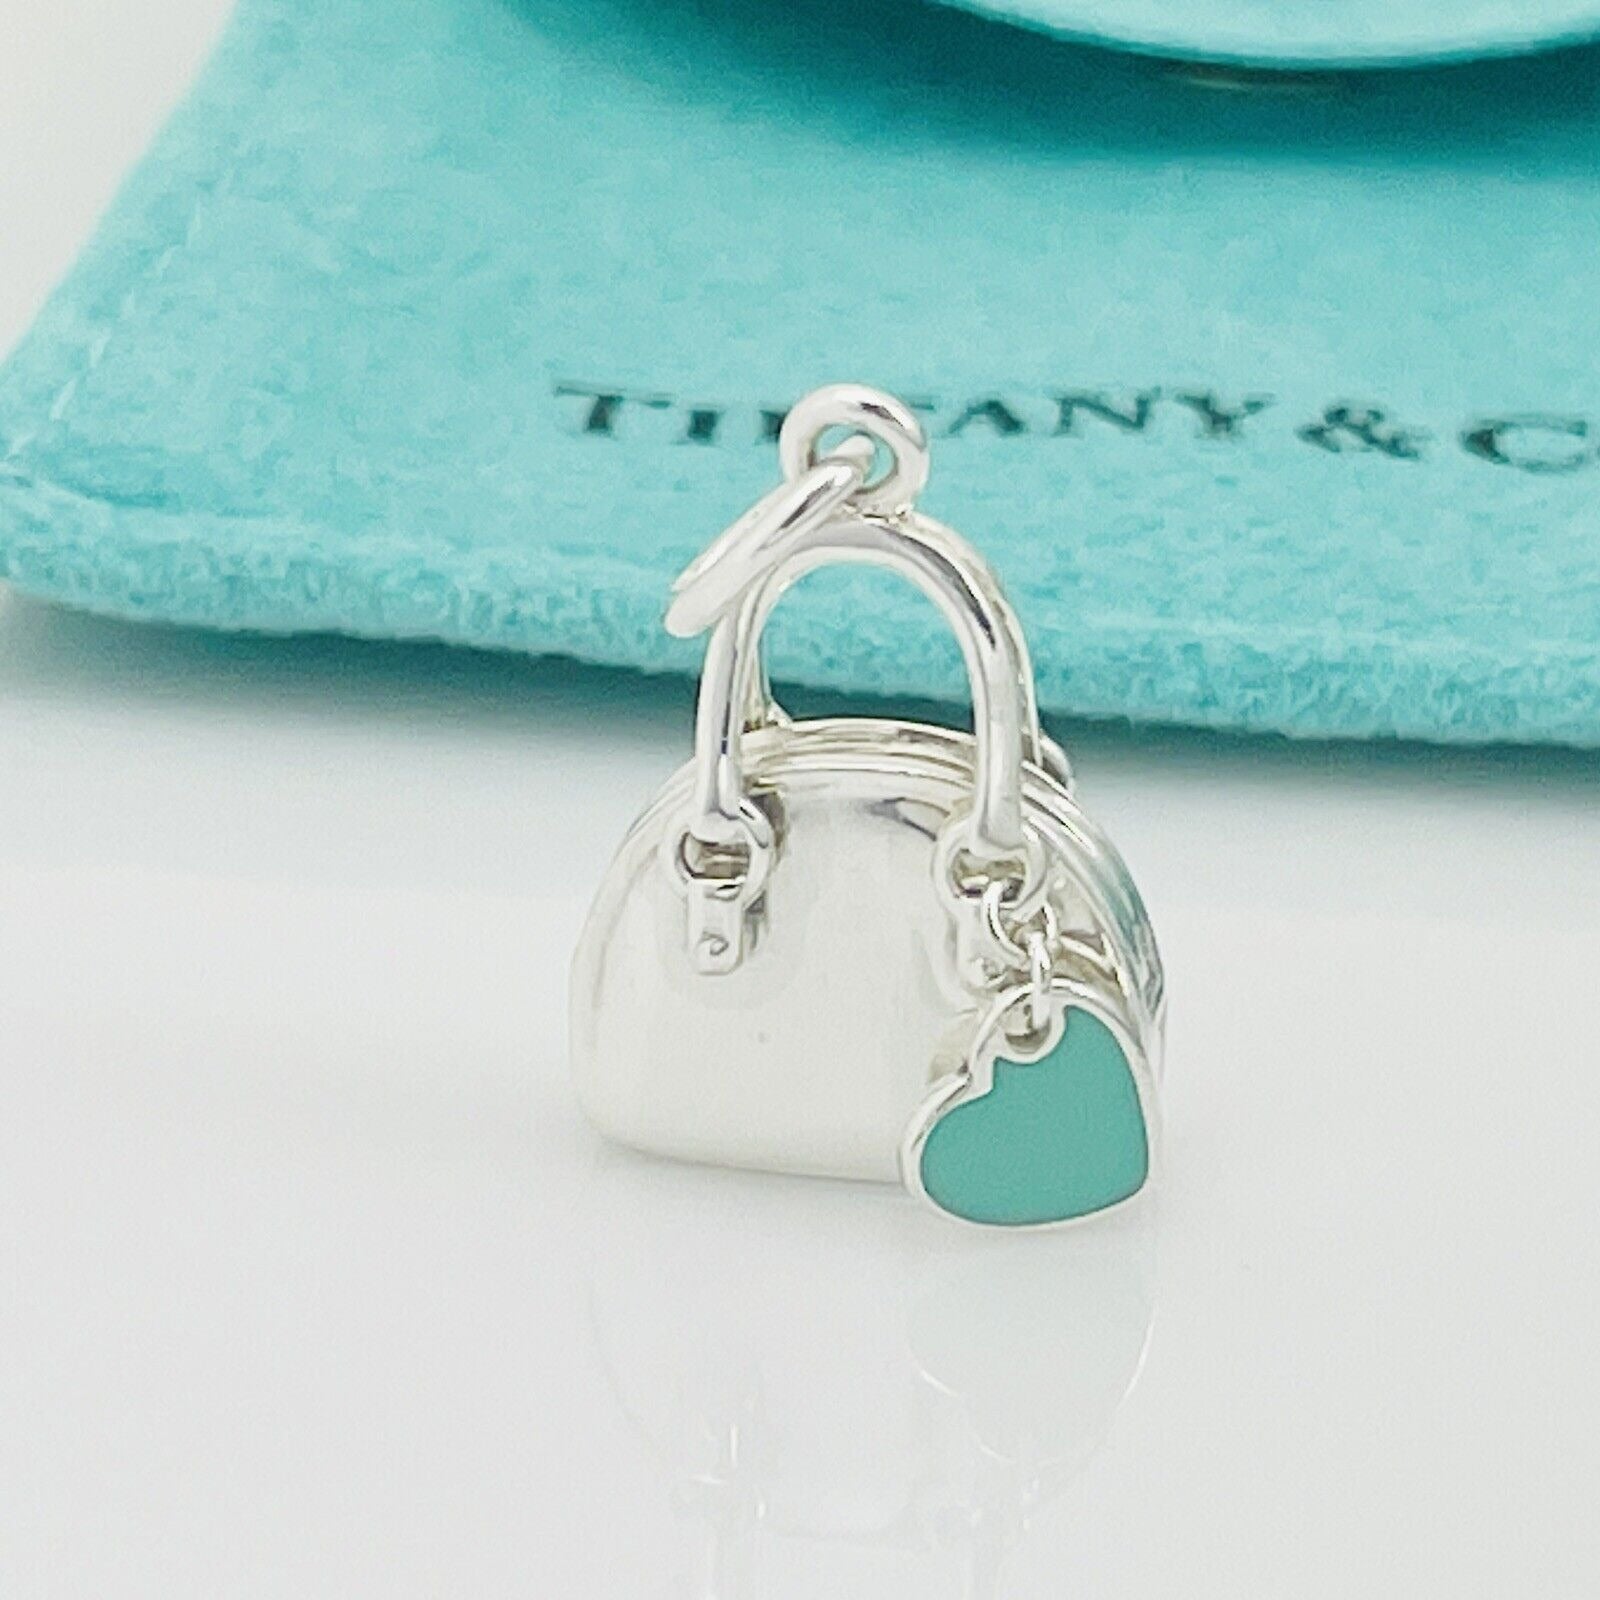 Return to Tiffany® Pouch Bag Charm in Silver-colored Leather